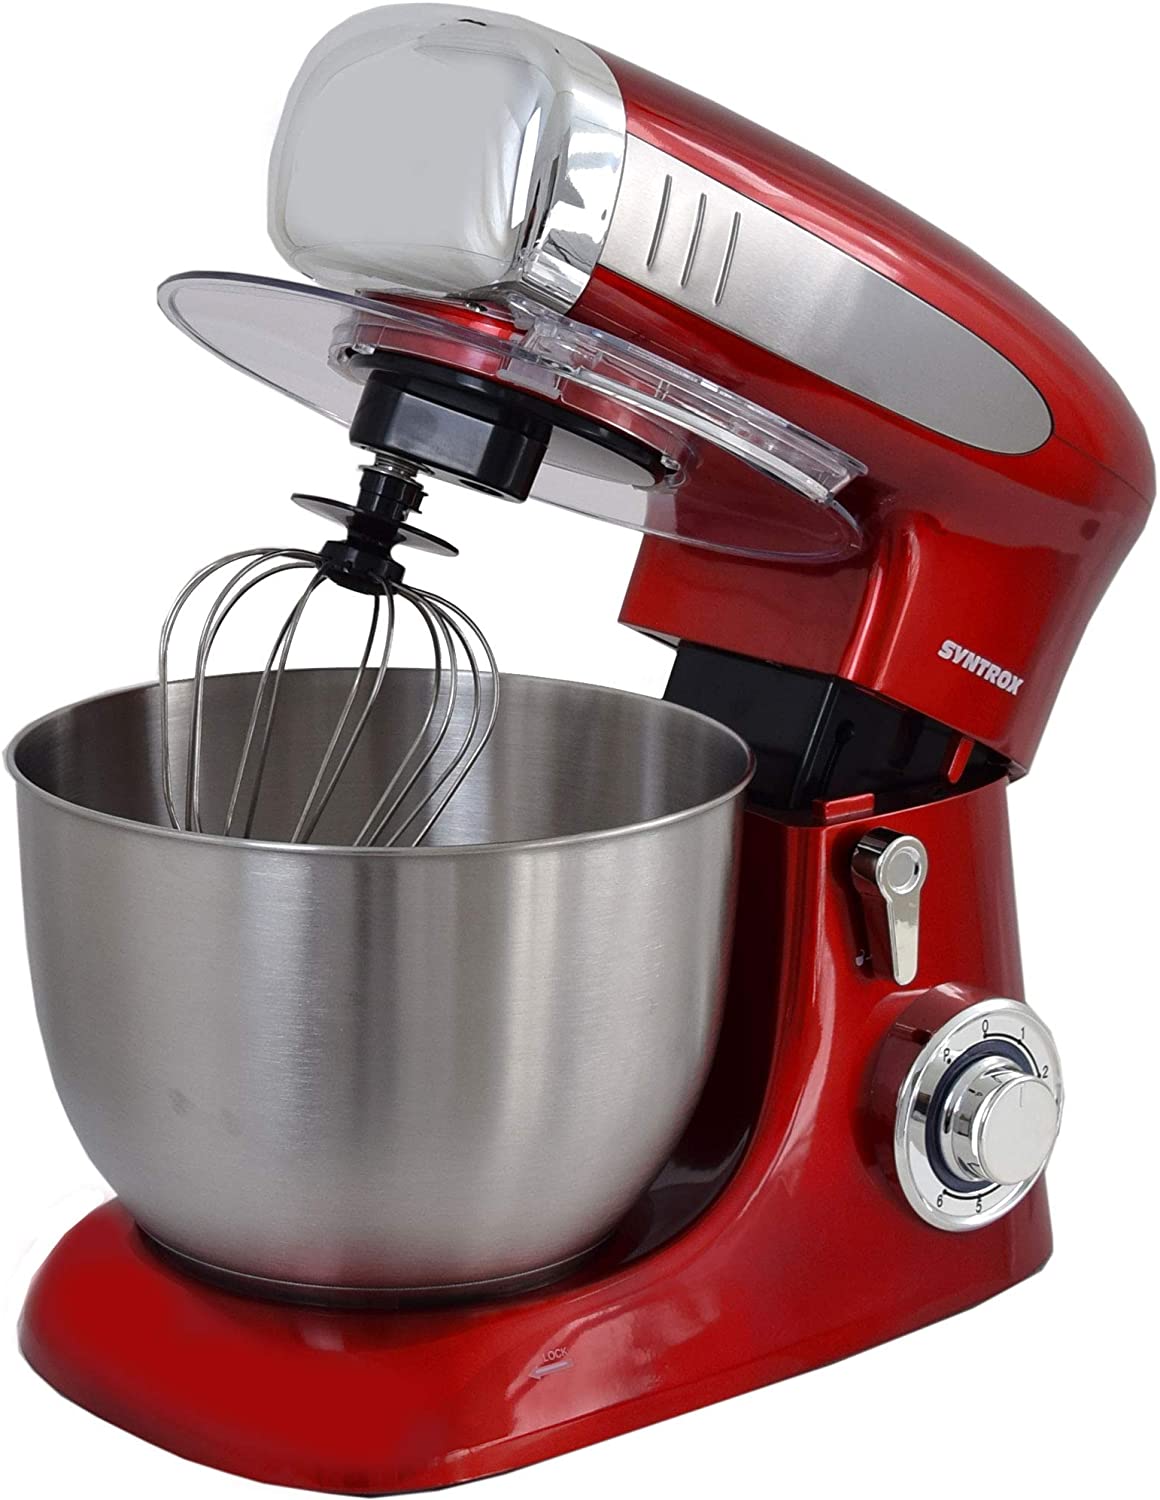 Syntrox Germany KM-1300W Red Food Processor Kneading Machine Mixer, Stainless Steel Container, 6.5 Litres, Red